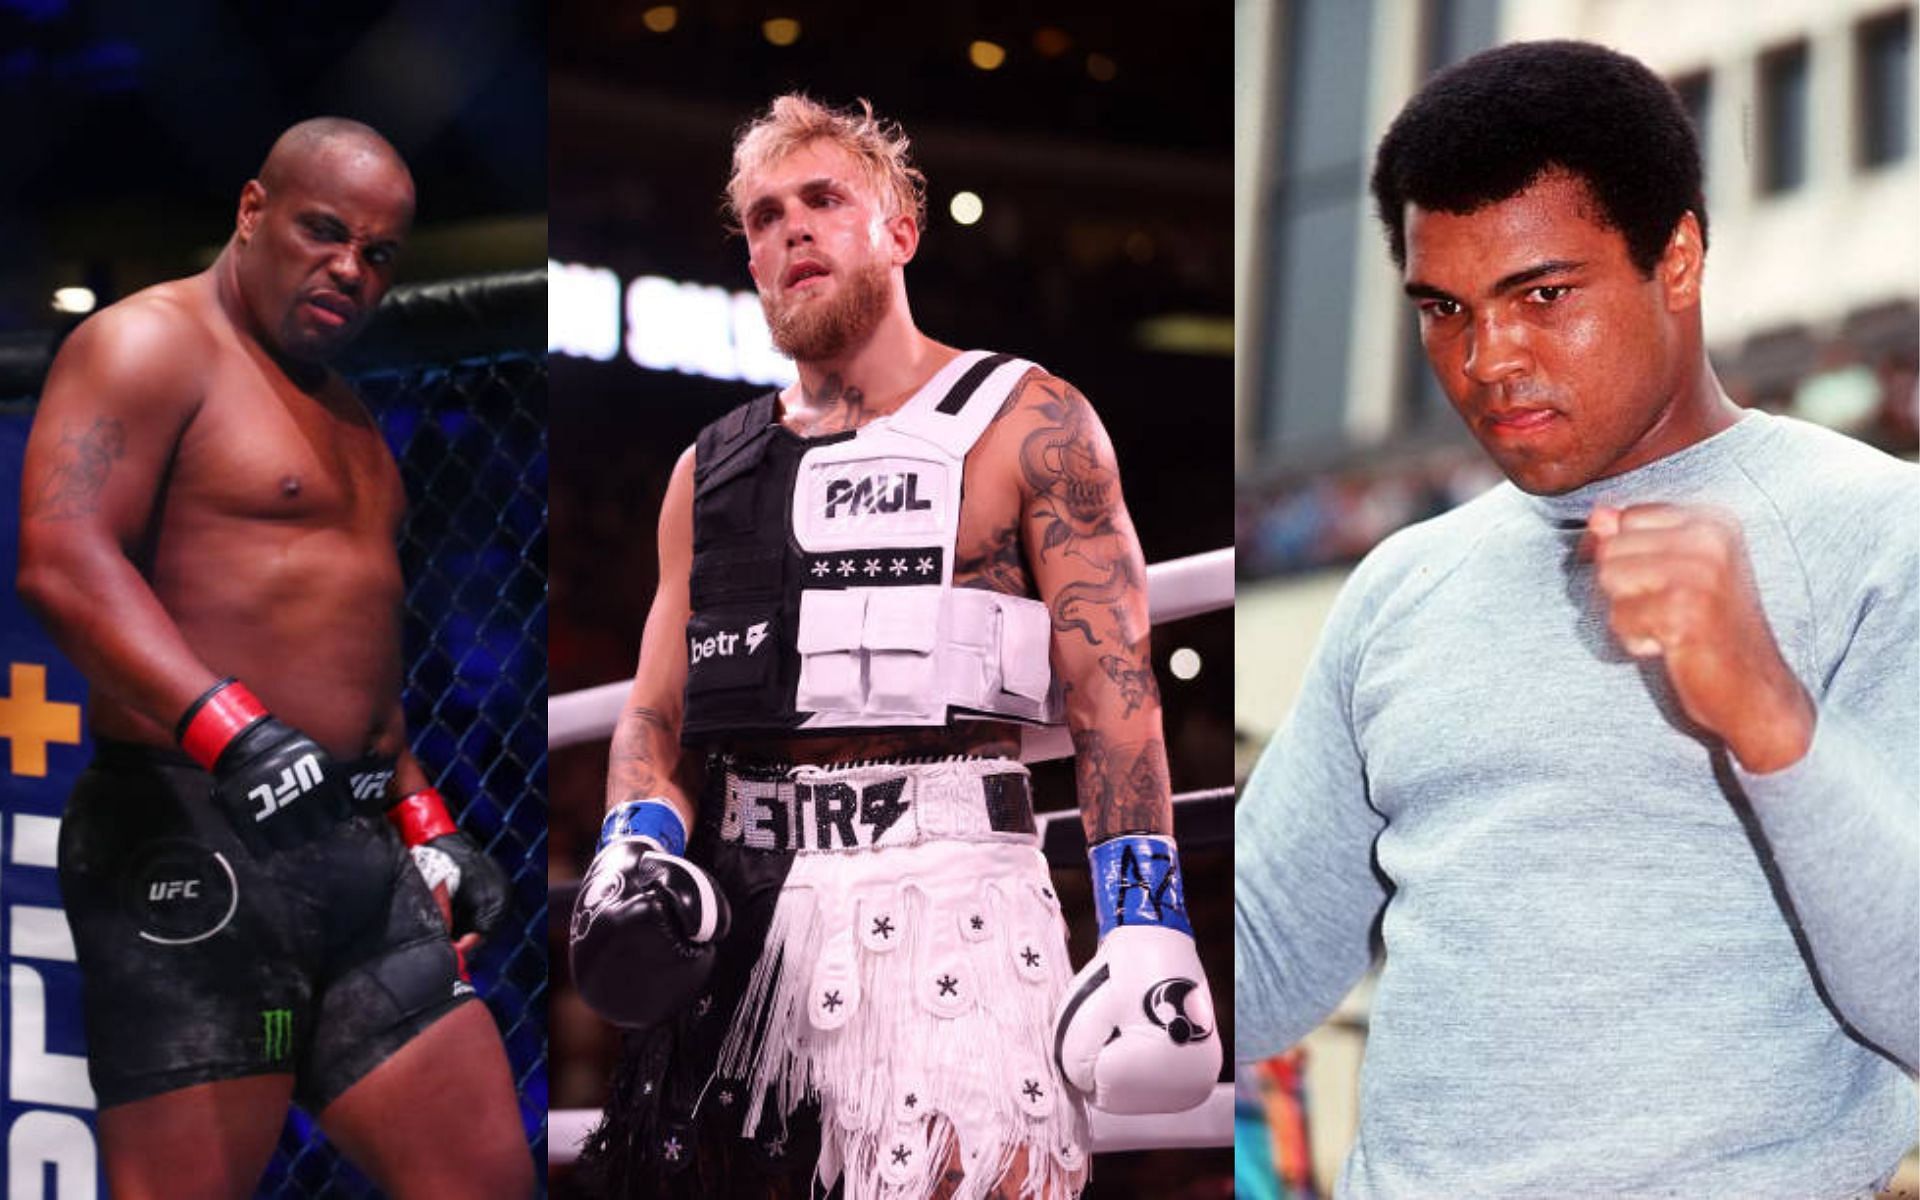 From left to right: Daniel Cormier, Jake Paul, and Muhammad Ali